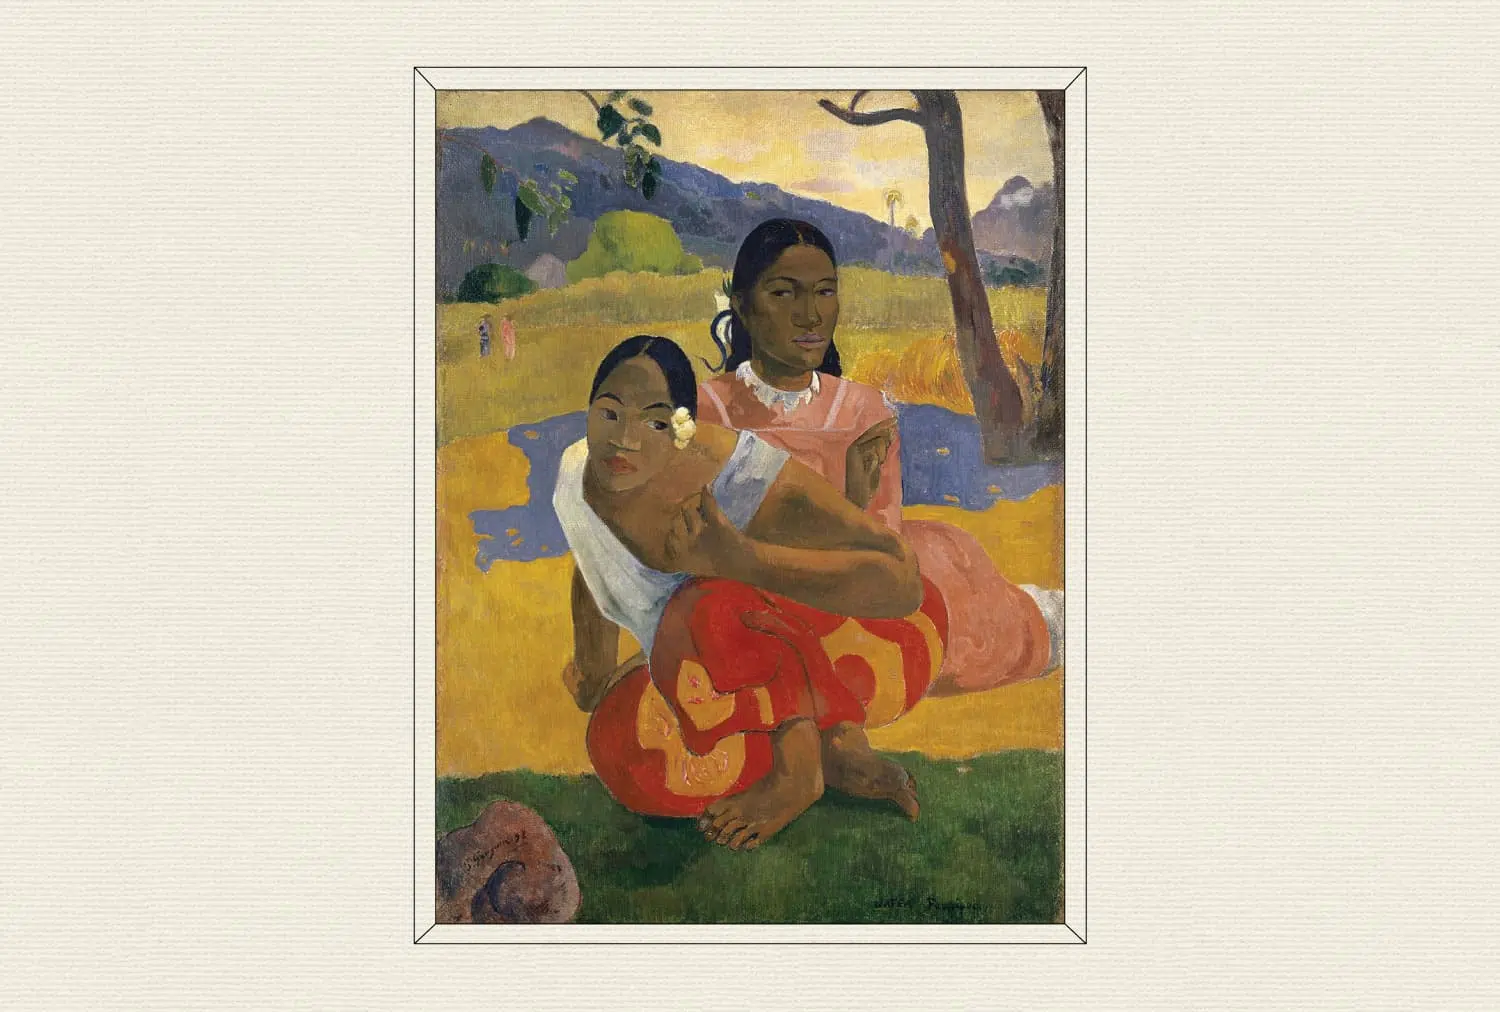 Nafea Faa Ipoipo (When Will You Marry?), 1892, by Paul Gauguin